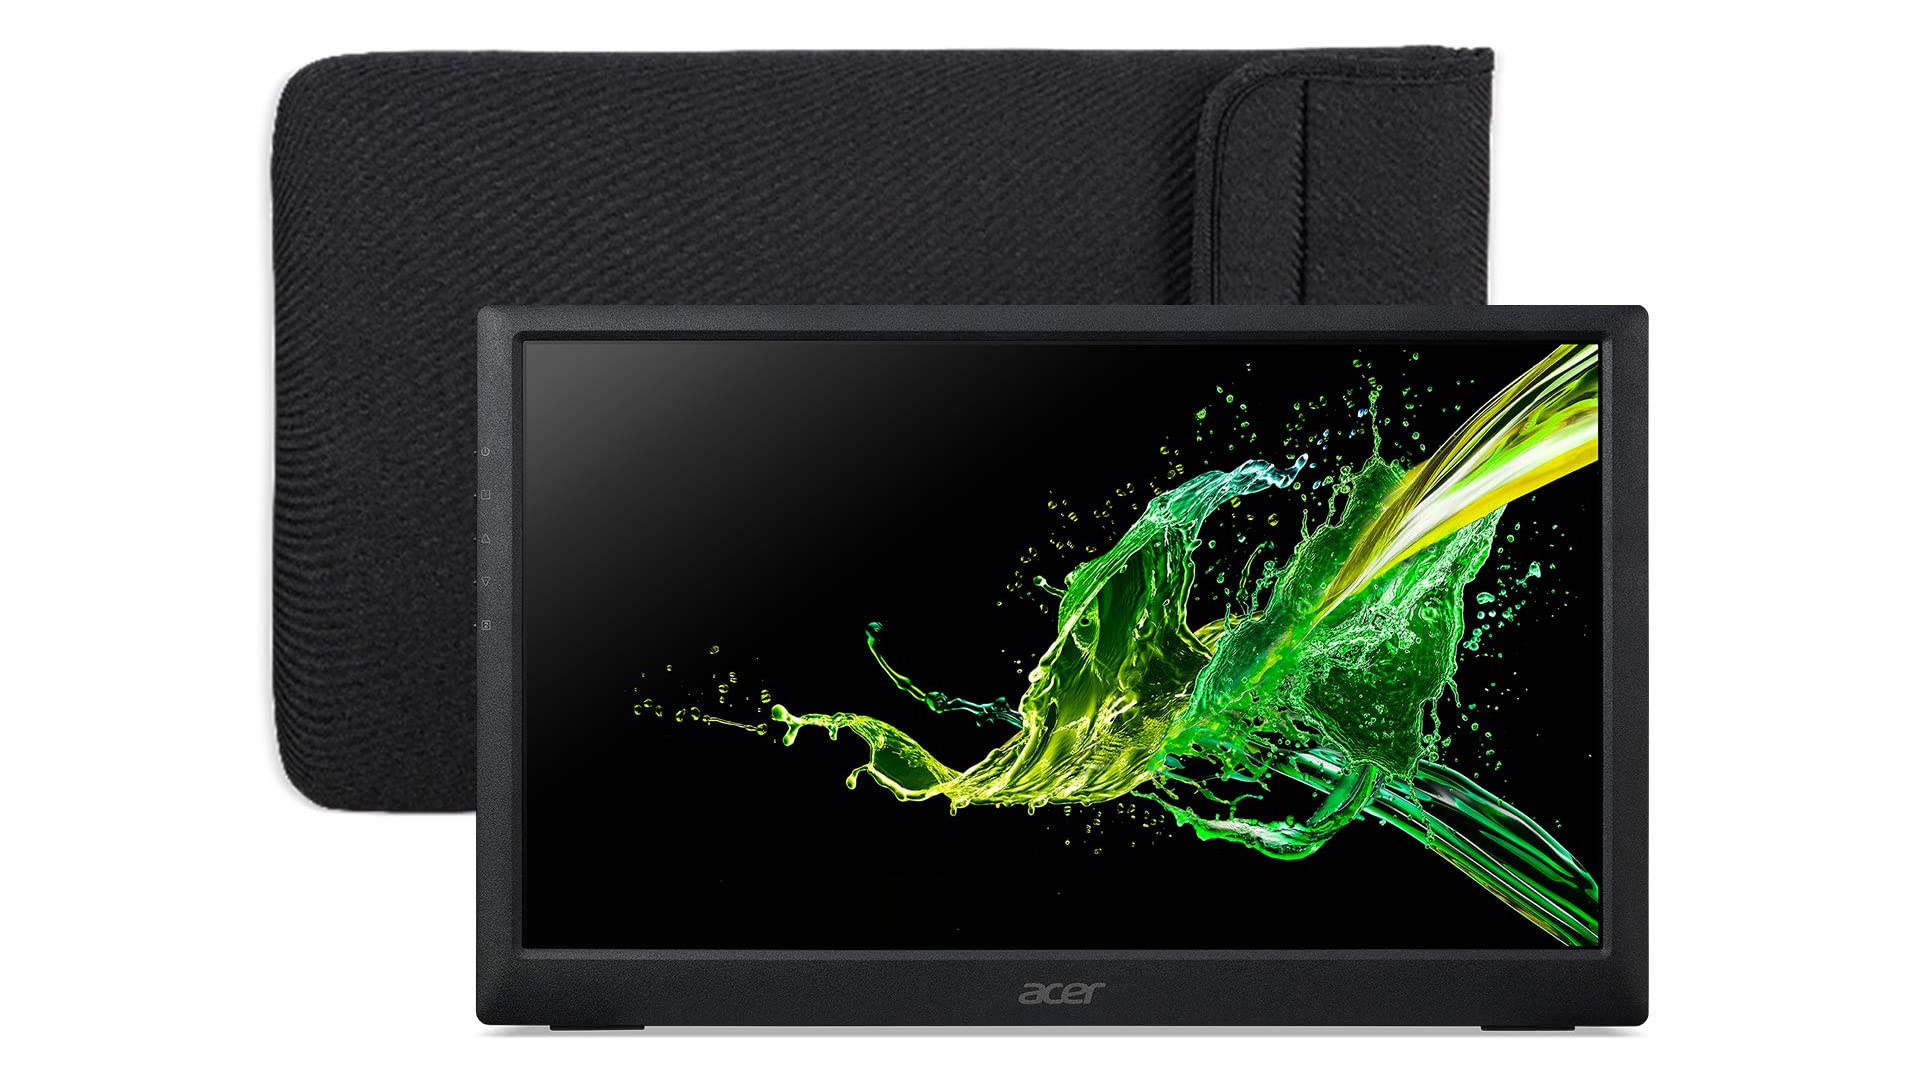 Acer PM161Q portable monitor